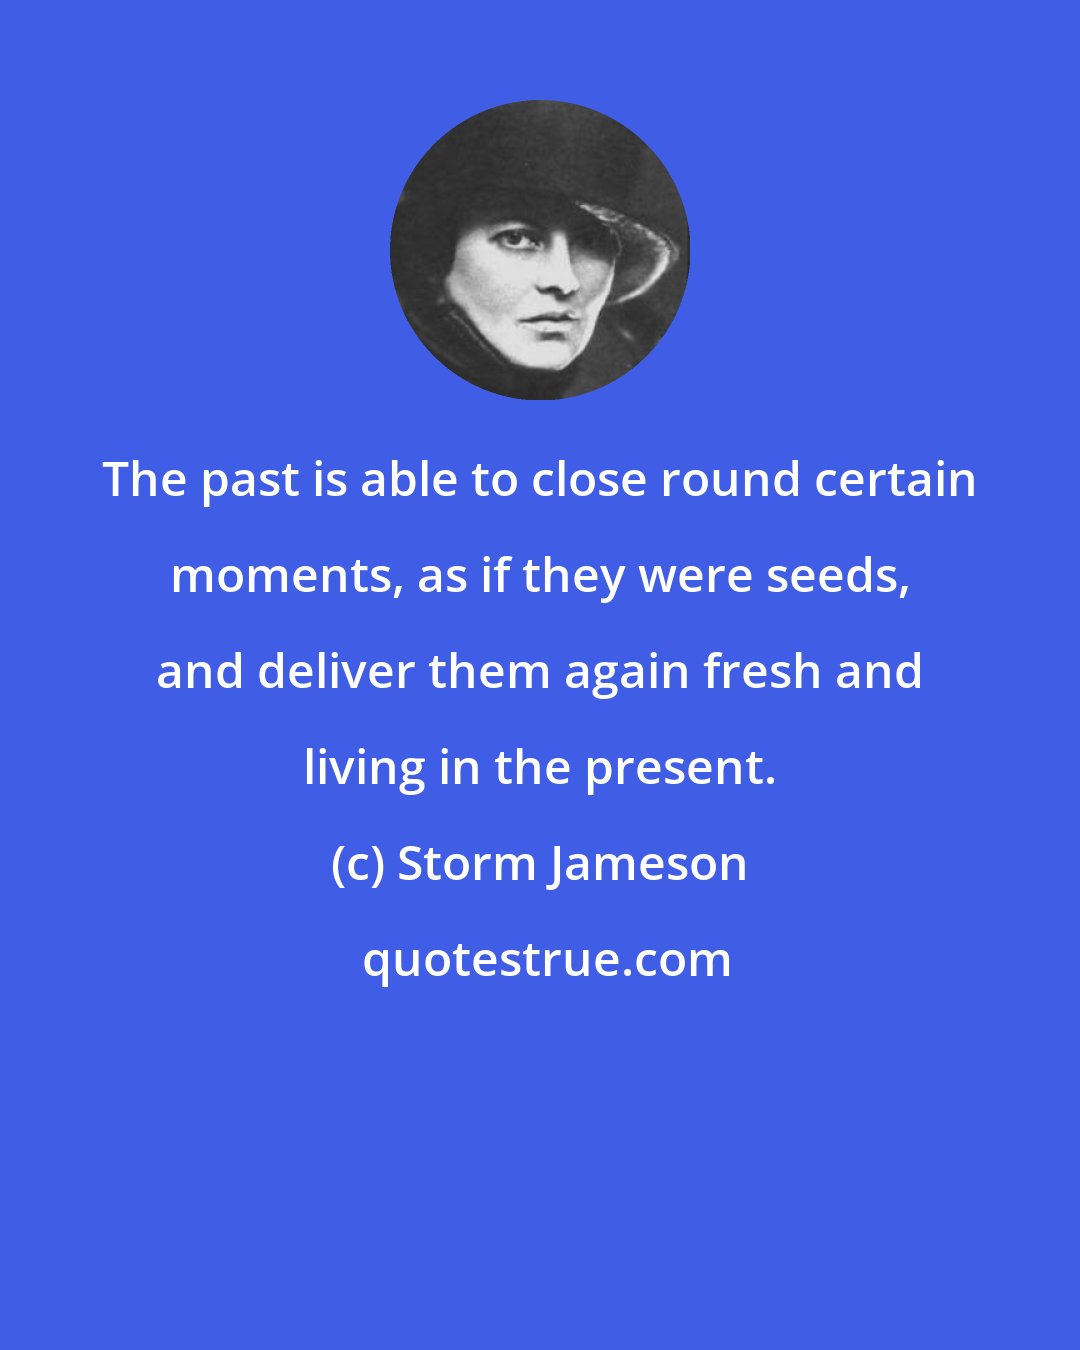 Storm Jameson: The past is able to close round certain moments, as if they were seeds, and deliver them again fresh and living in the present.